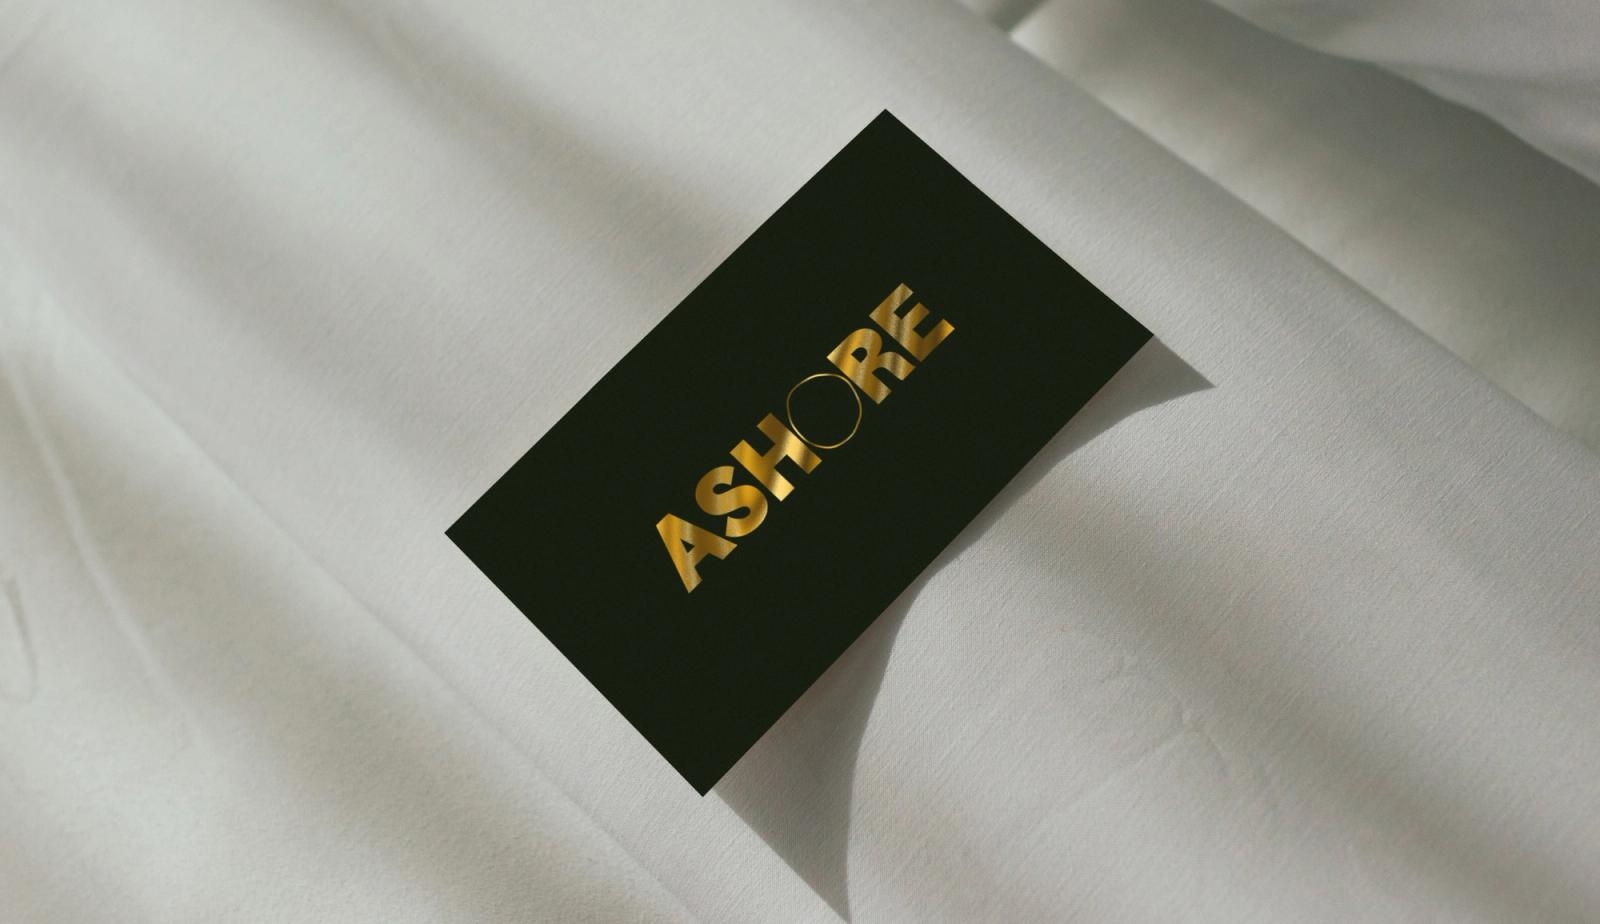 Our beautiful gold-foil adorned gift cards.